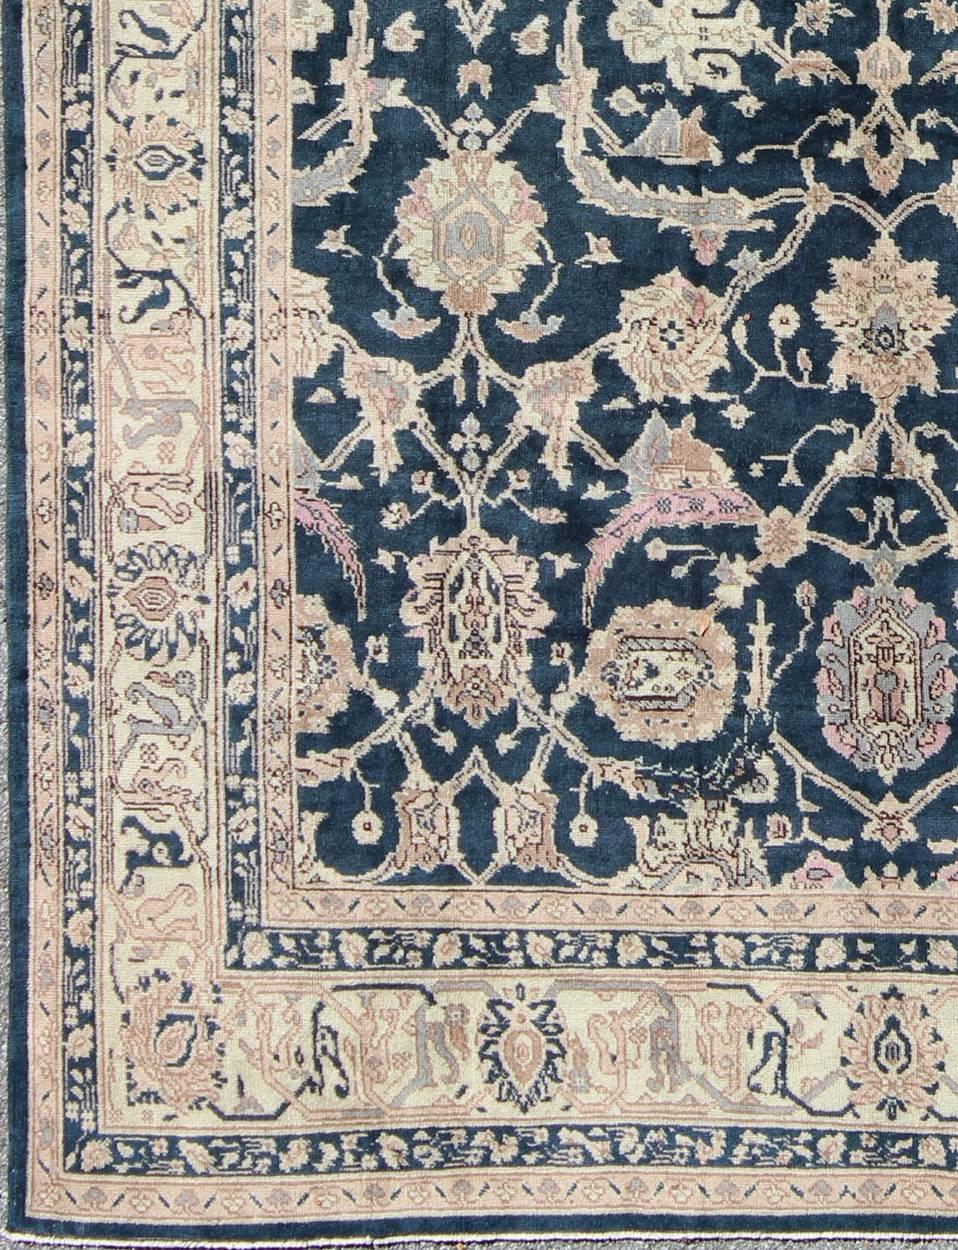 Deep Navy Blue Vintage Turkish Rug. Keivan Woven Arts/ rug/en-140898, origin/turkey

Measures: 8.3 x 10.10.

This Turkish rug contains subtle tones of light pink, lavender, and cream, which are highlighted by deep navy blue field.  The stylized